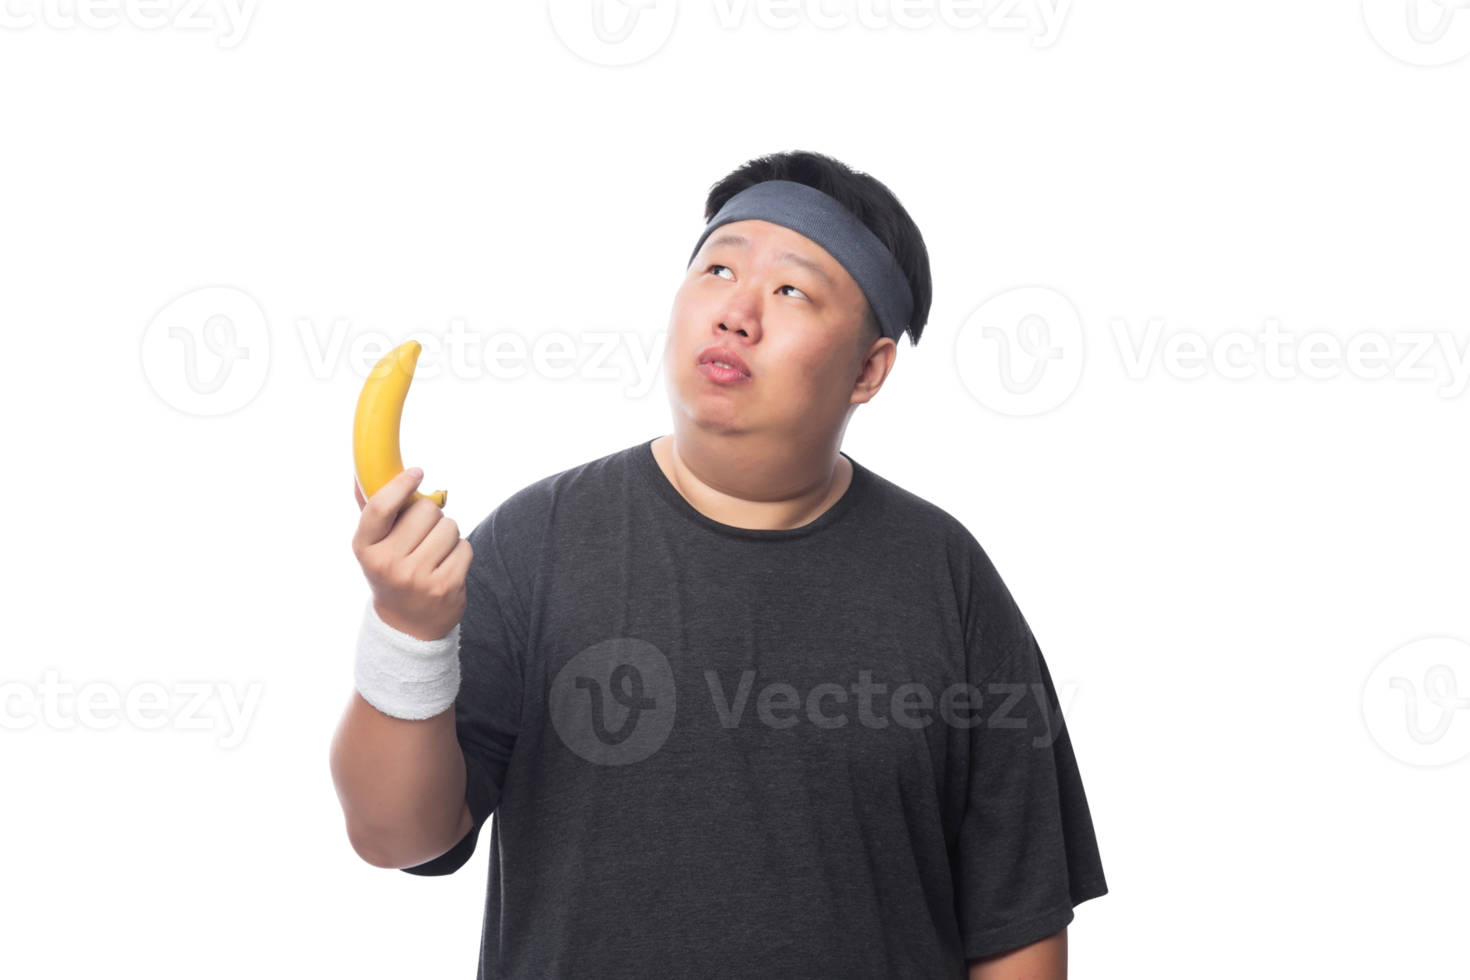 Young Asian funny fat sport man with bananas, Png file